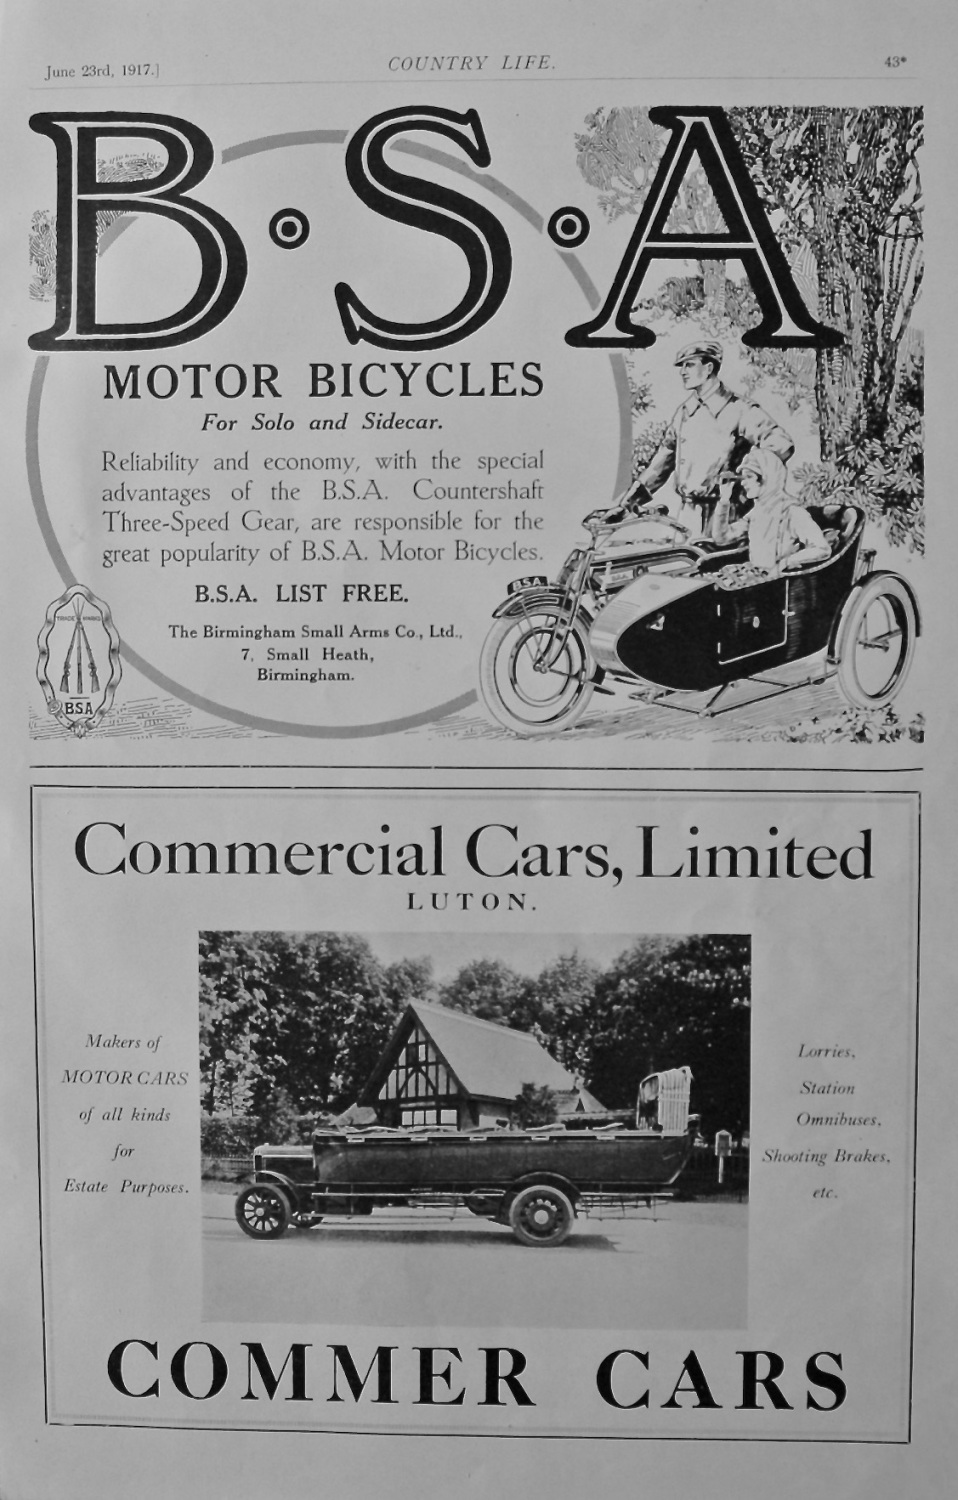 B.S.A advert and Commer Cars advert